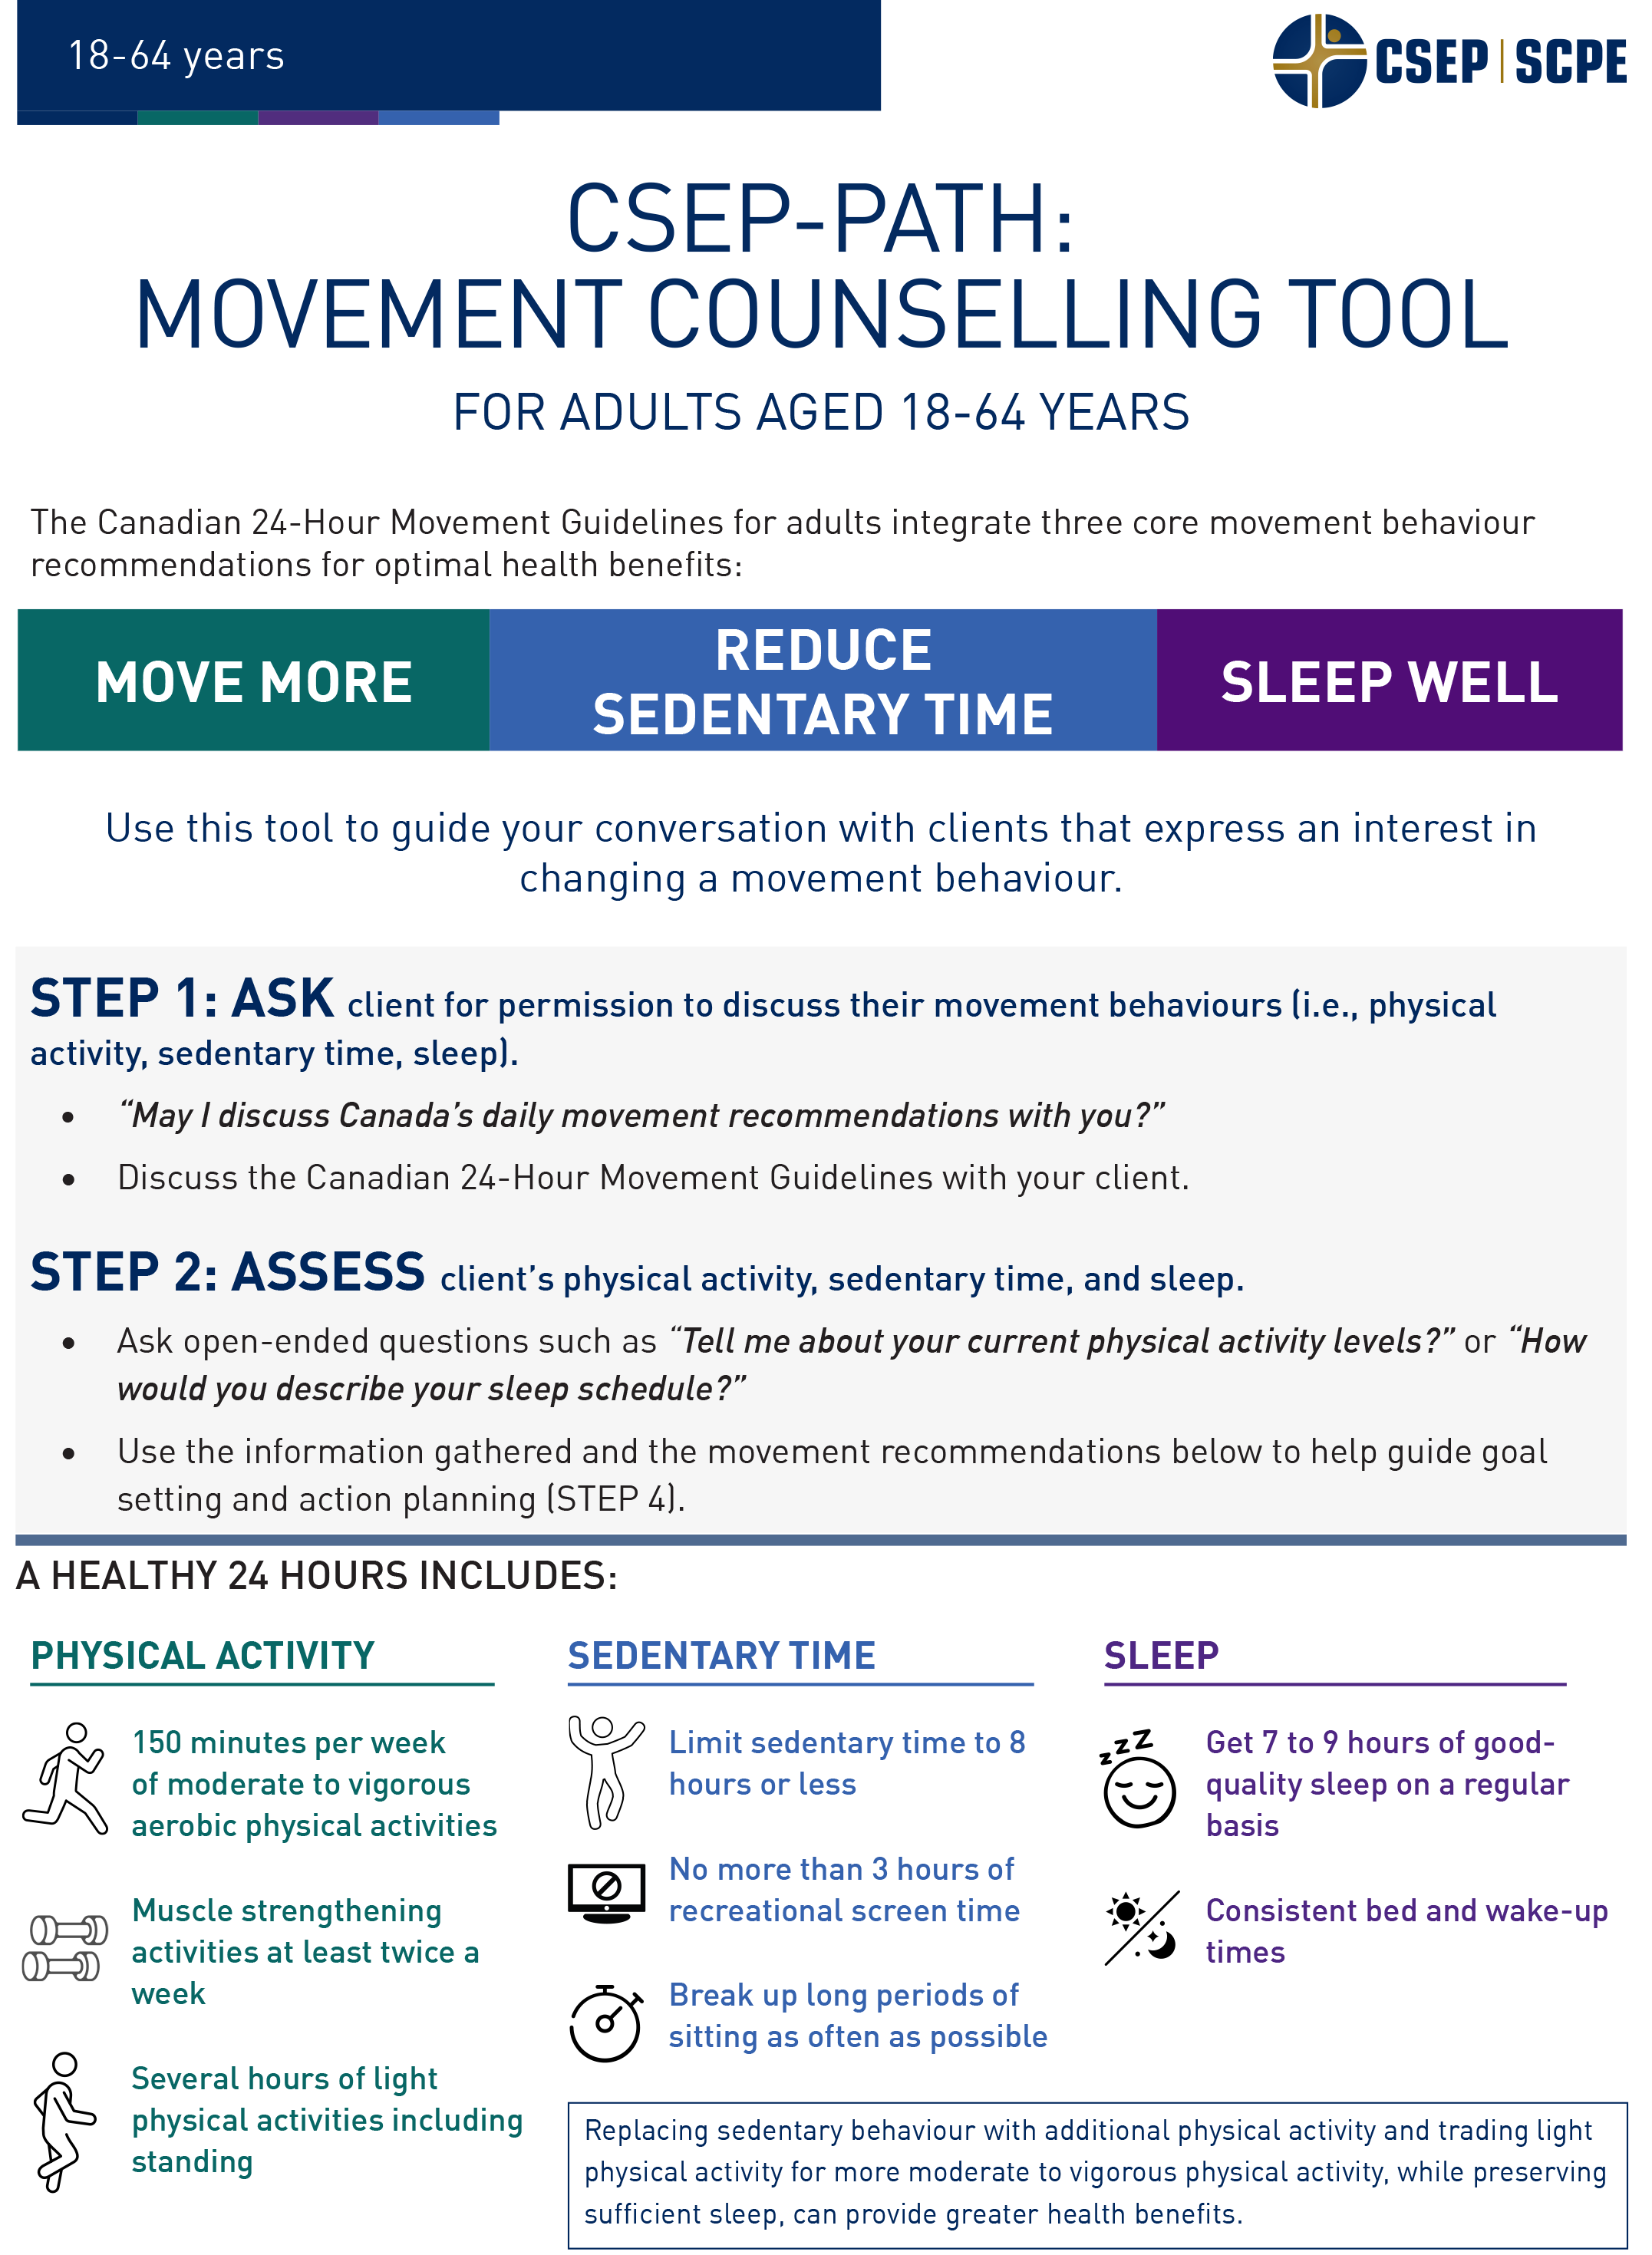 24H Movement Counselling Tool Image